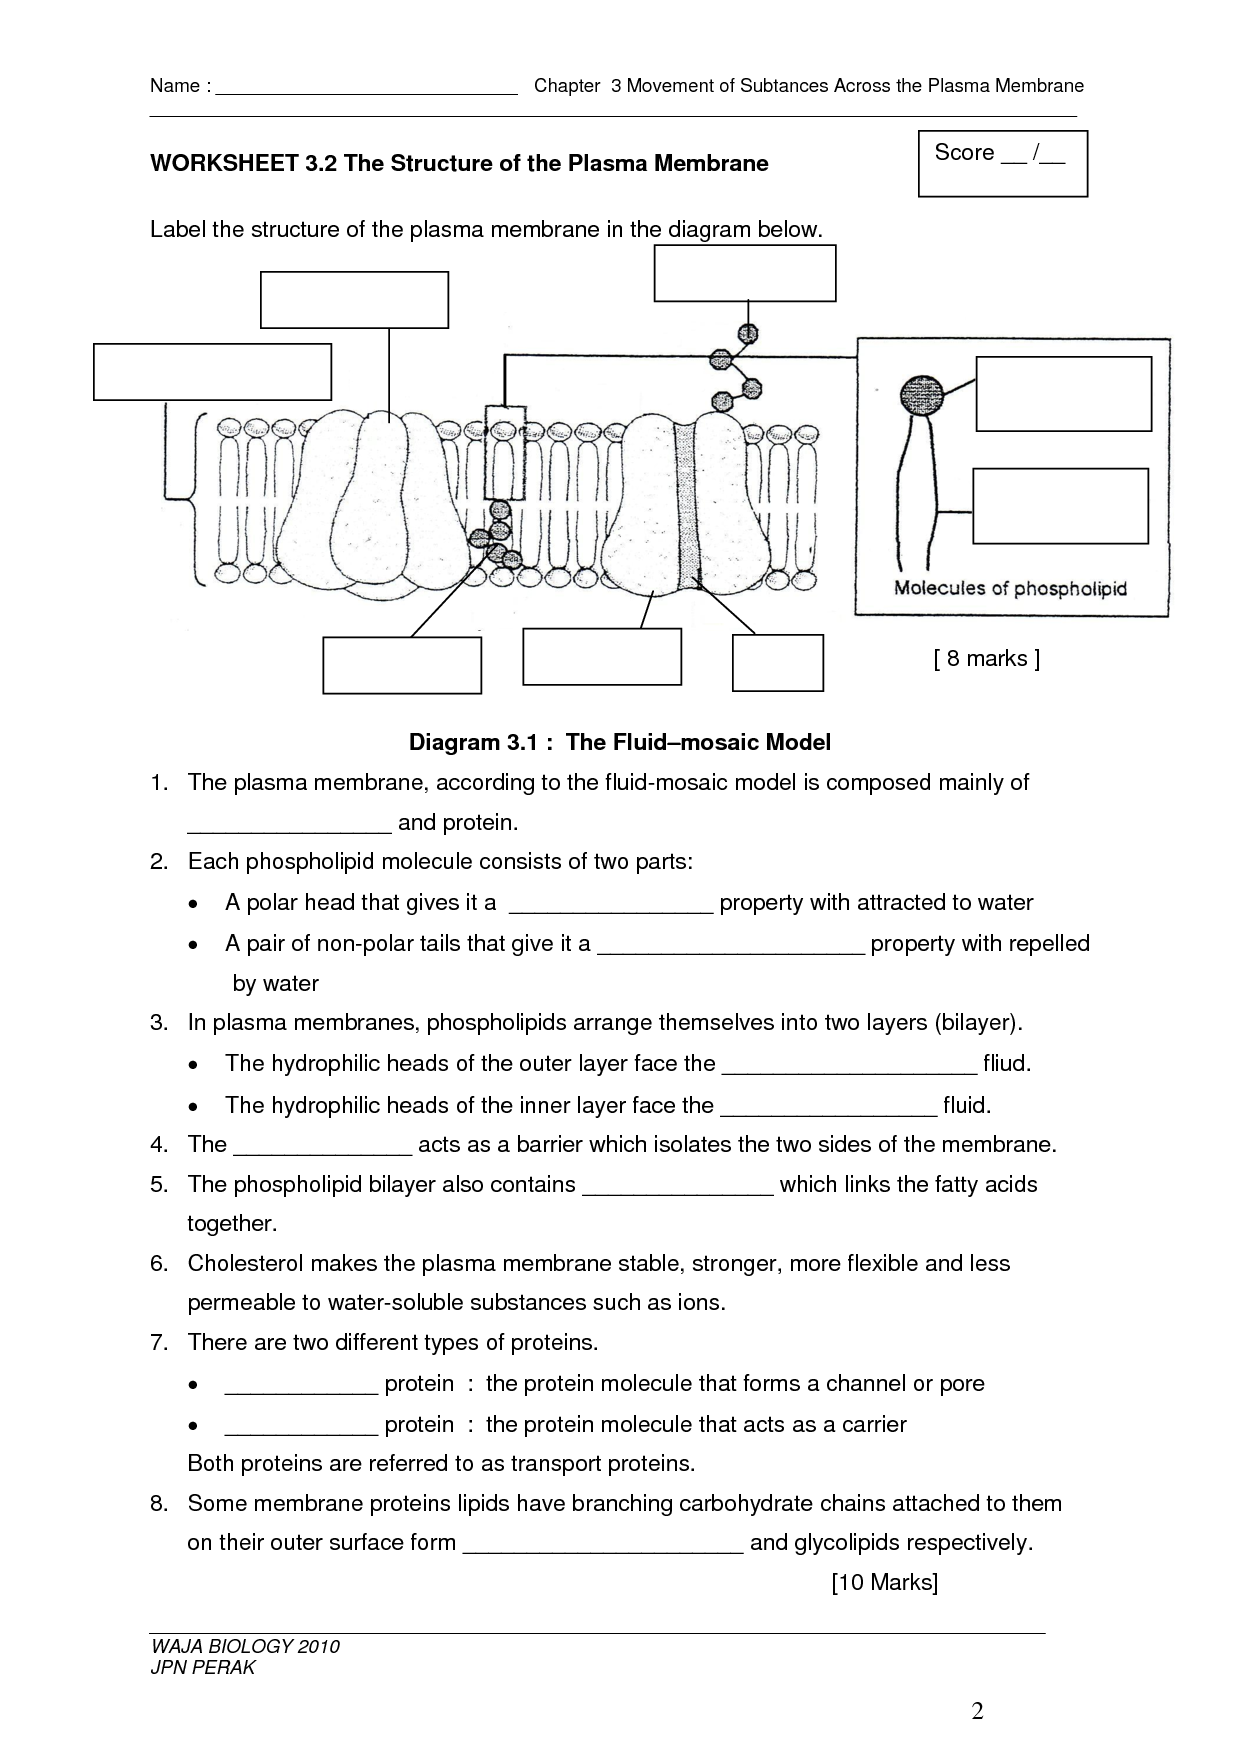 membrane-structure-and-function-worksheet-answer-key-function-worksheets